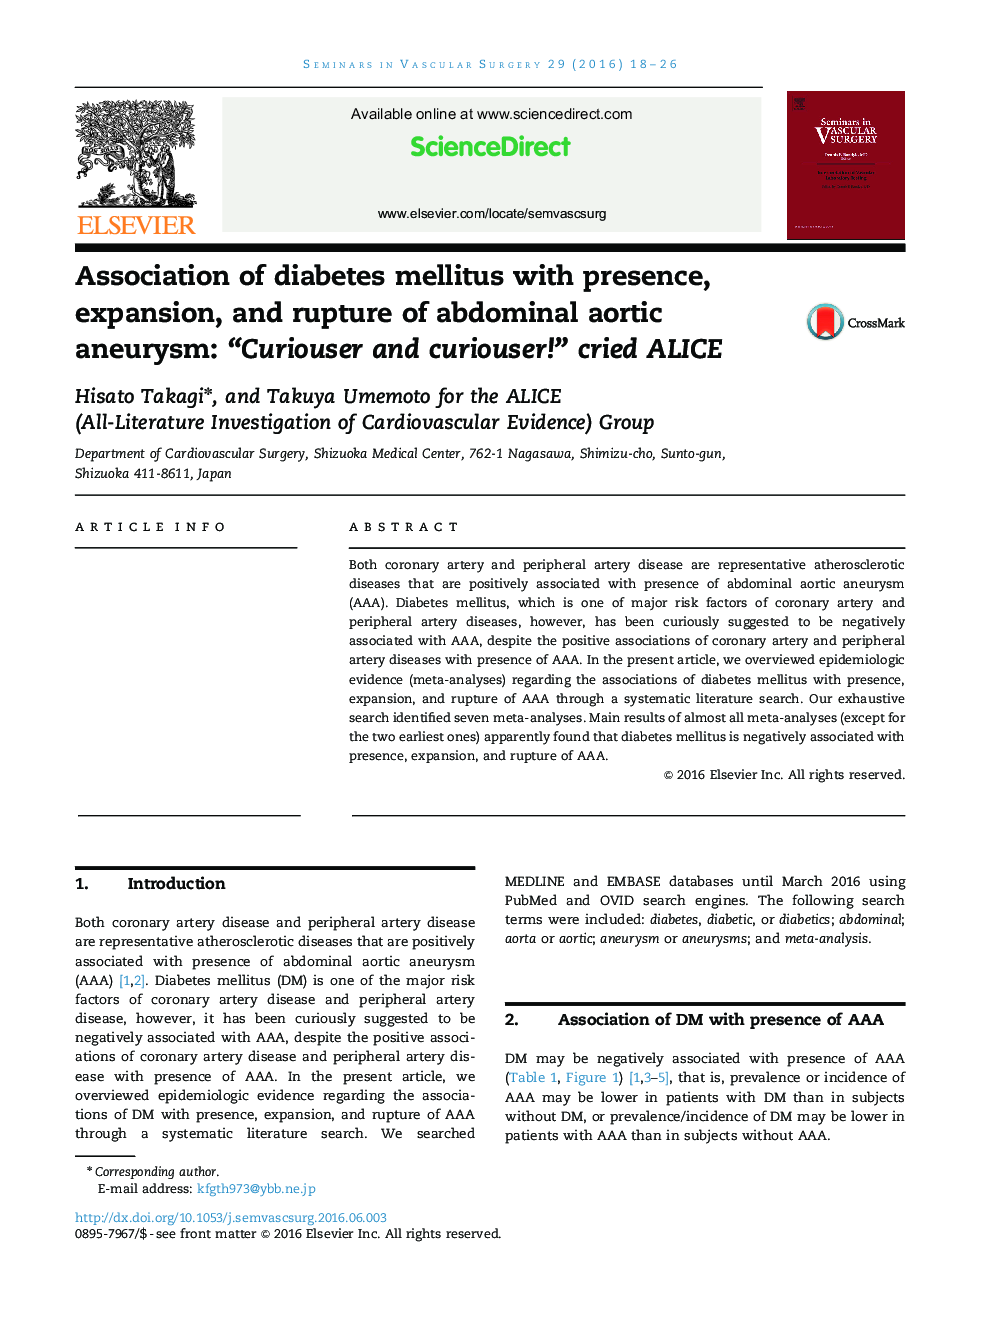 Association of diabetes mellitus with presence, expansion, and rupture of abdominal aortic aneurysm: “Curiouser and curiouser!” cried ALICE